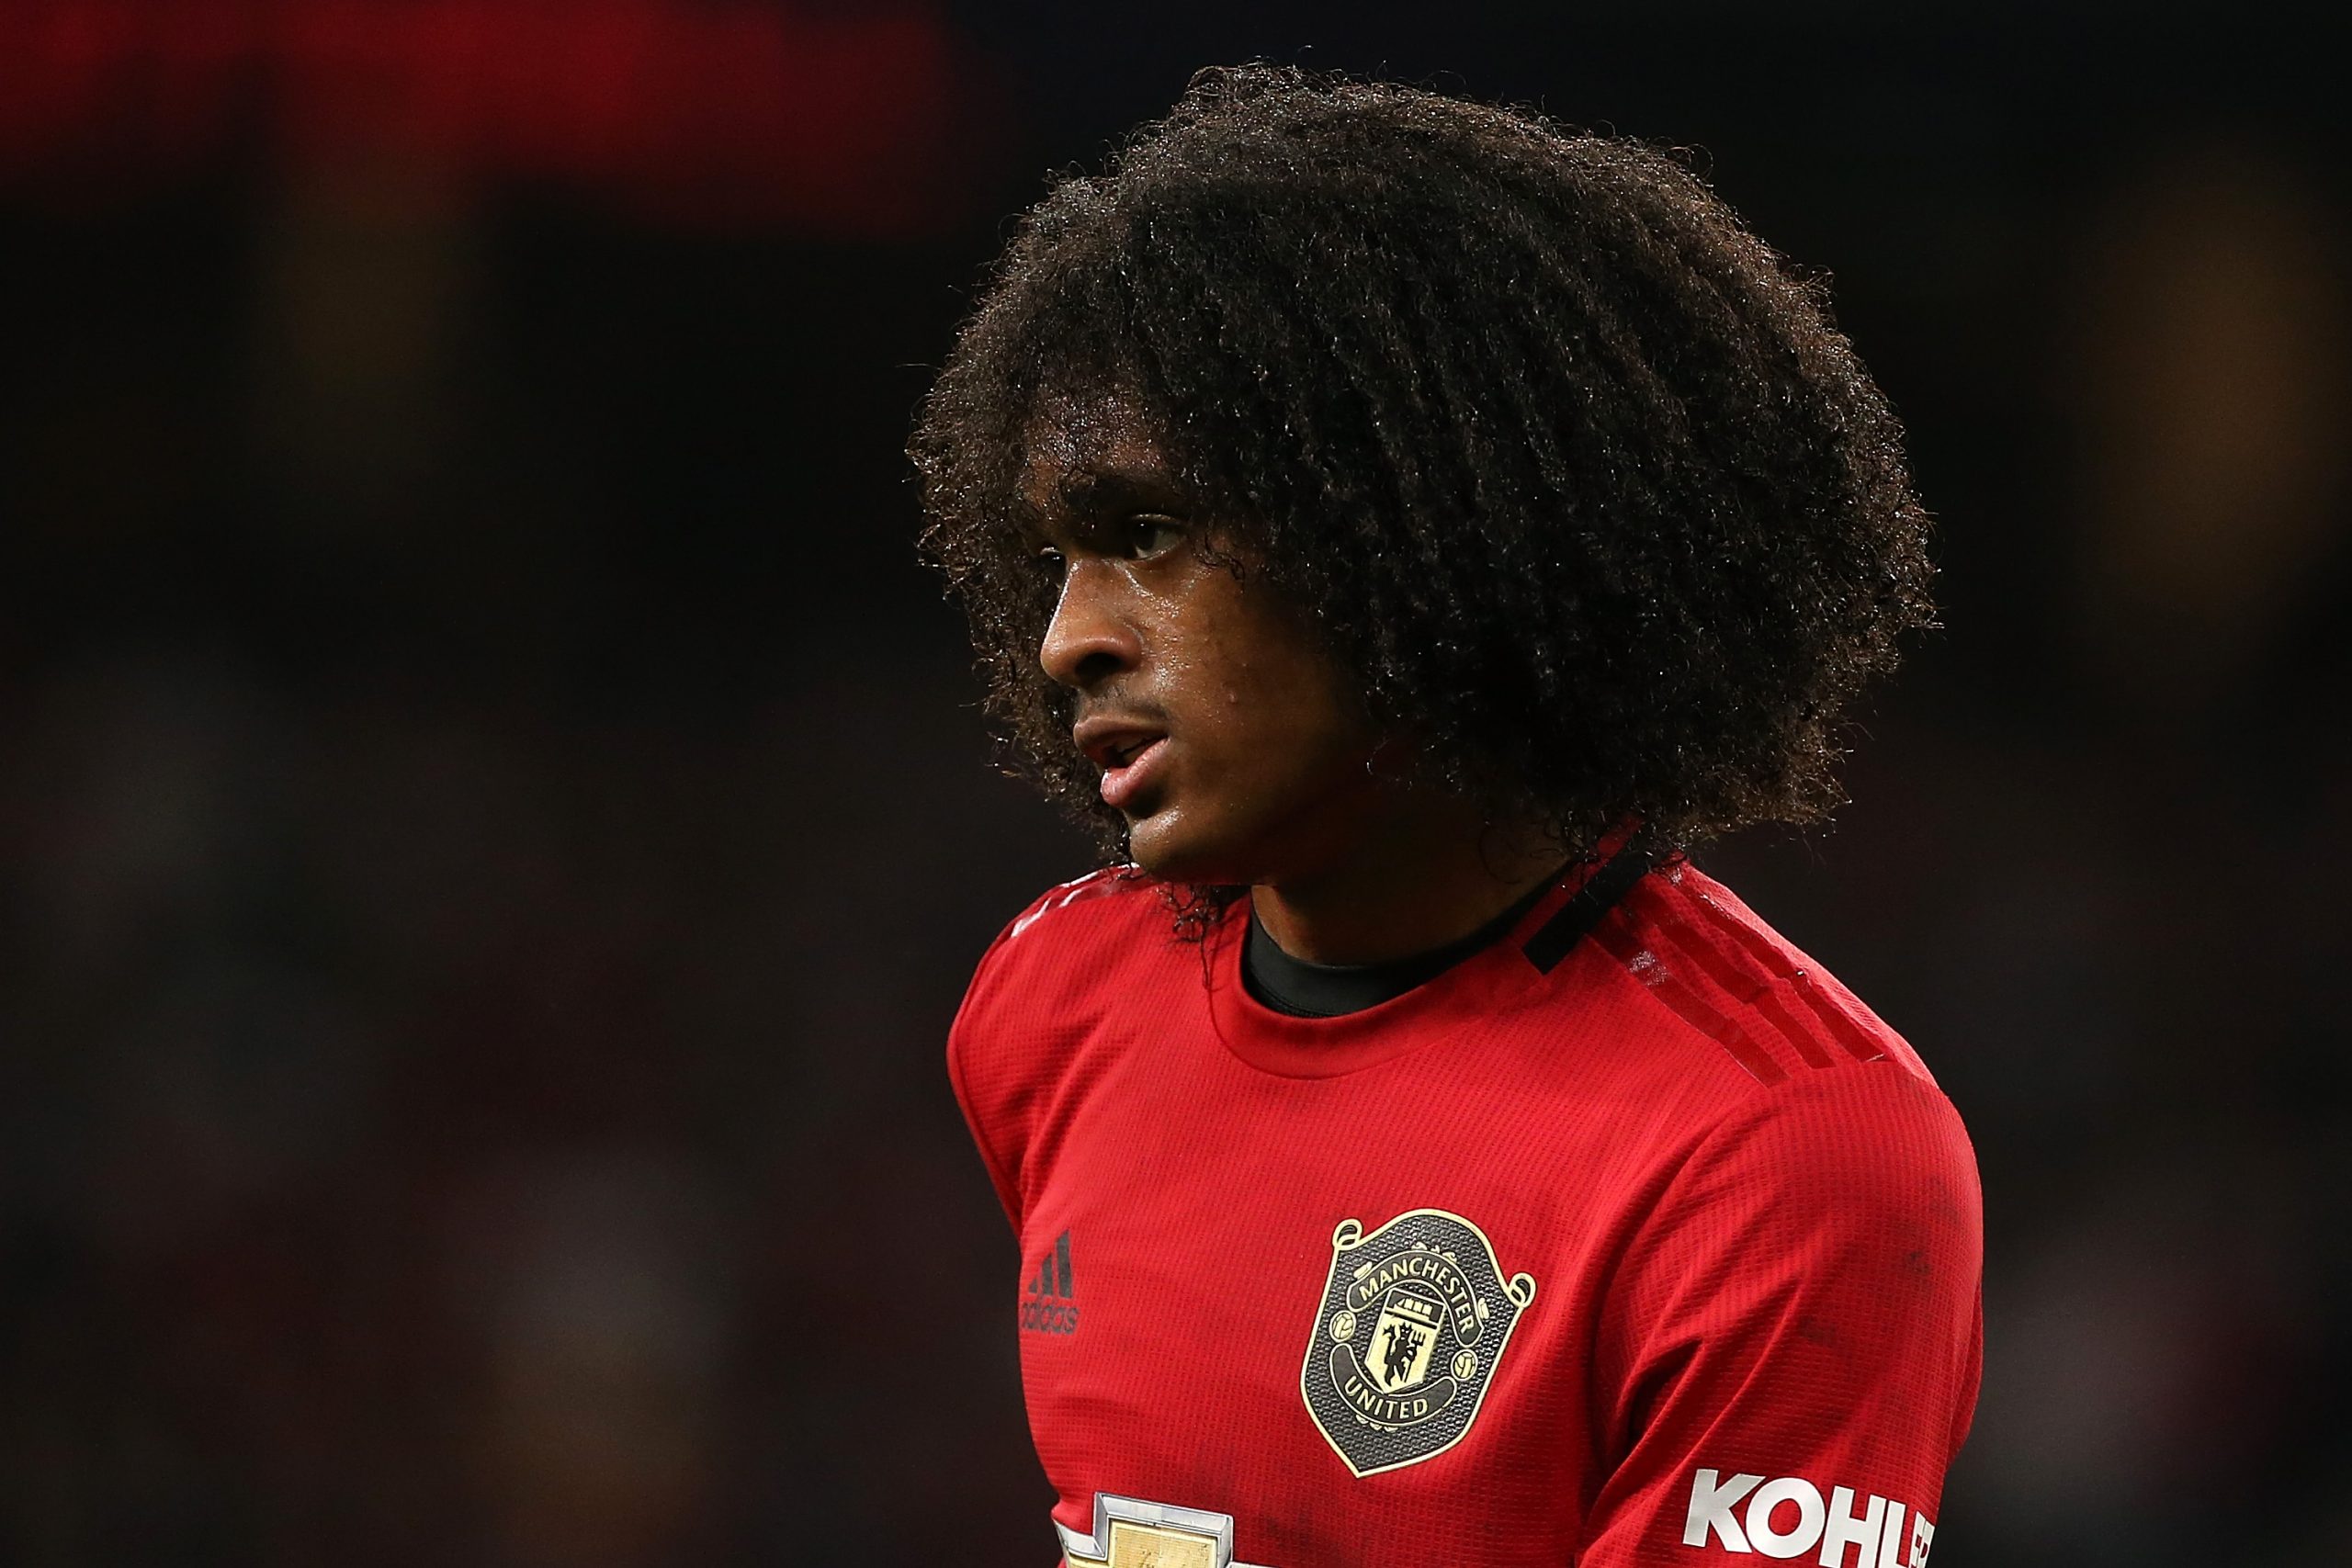 Manchester United starlet Tahith Chong closes in on return from injury.